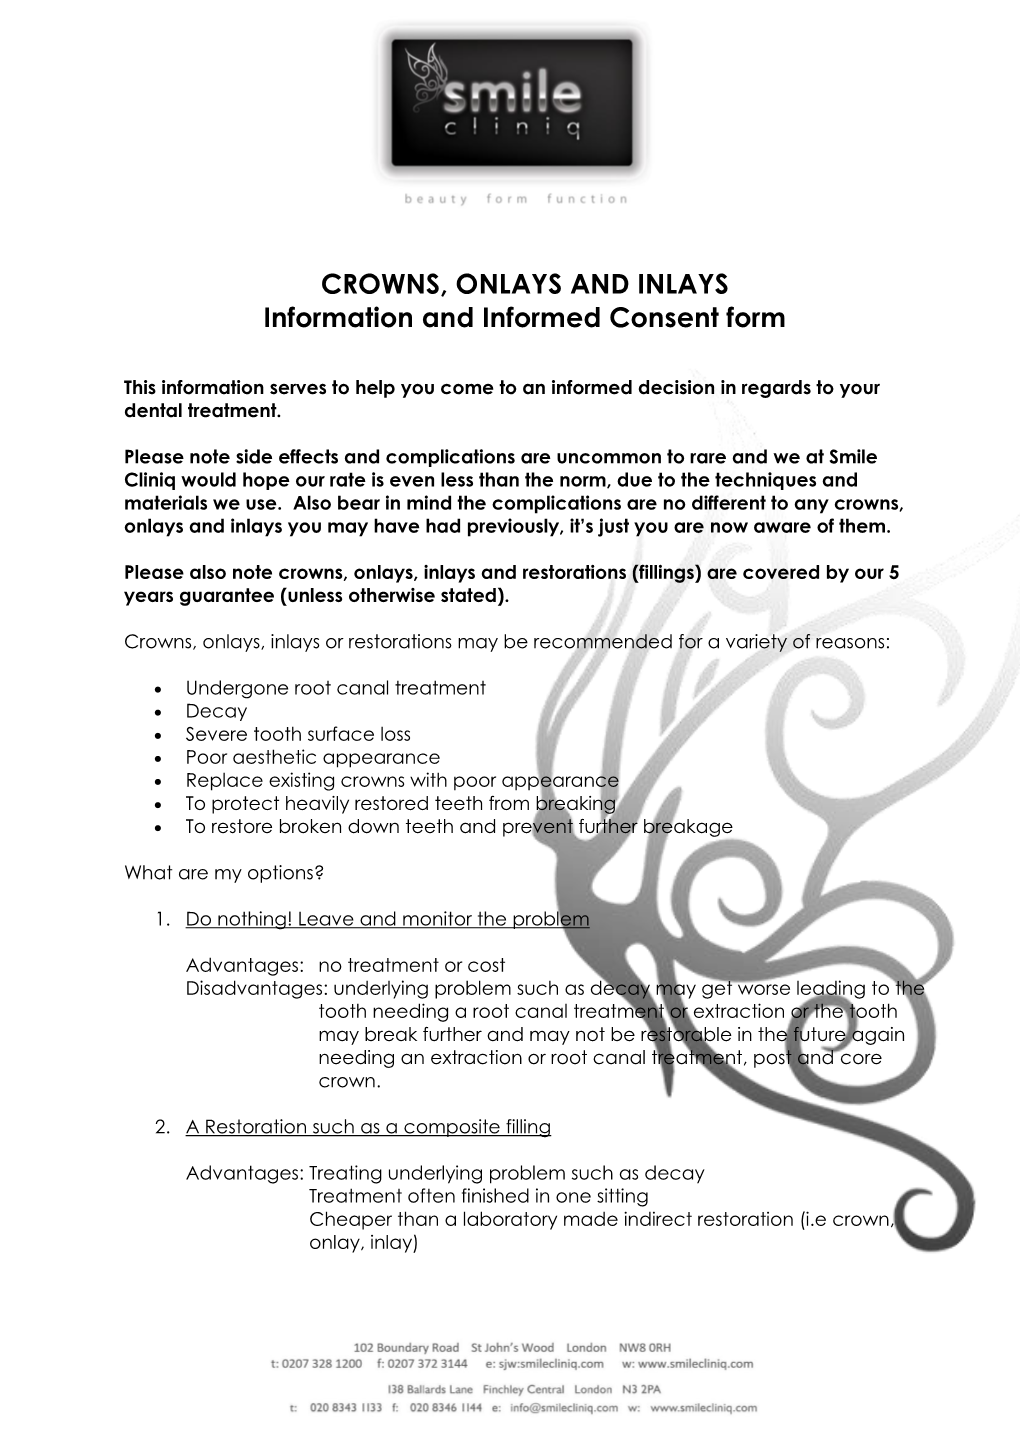 CROWNS, ONLAYS and INLAYS Information and Informed Consent Form